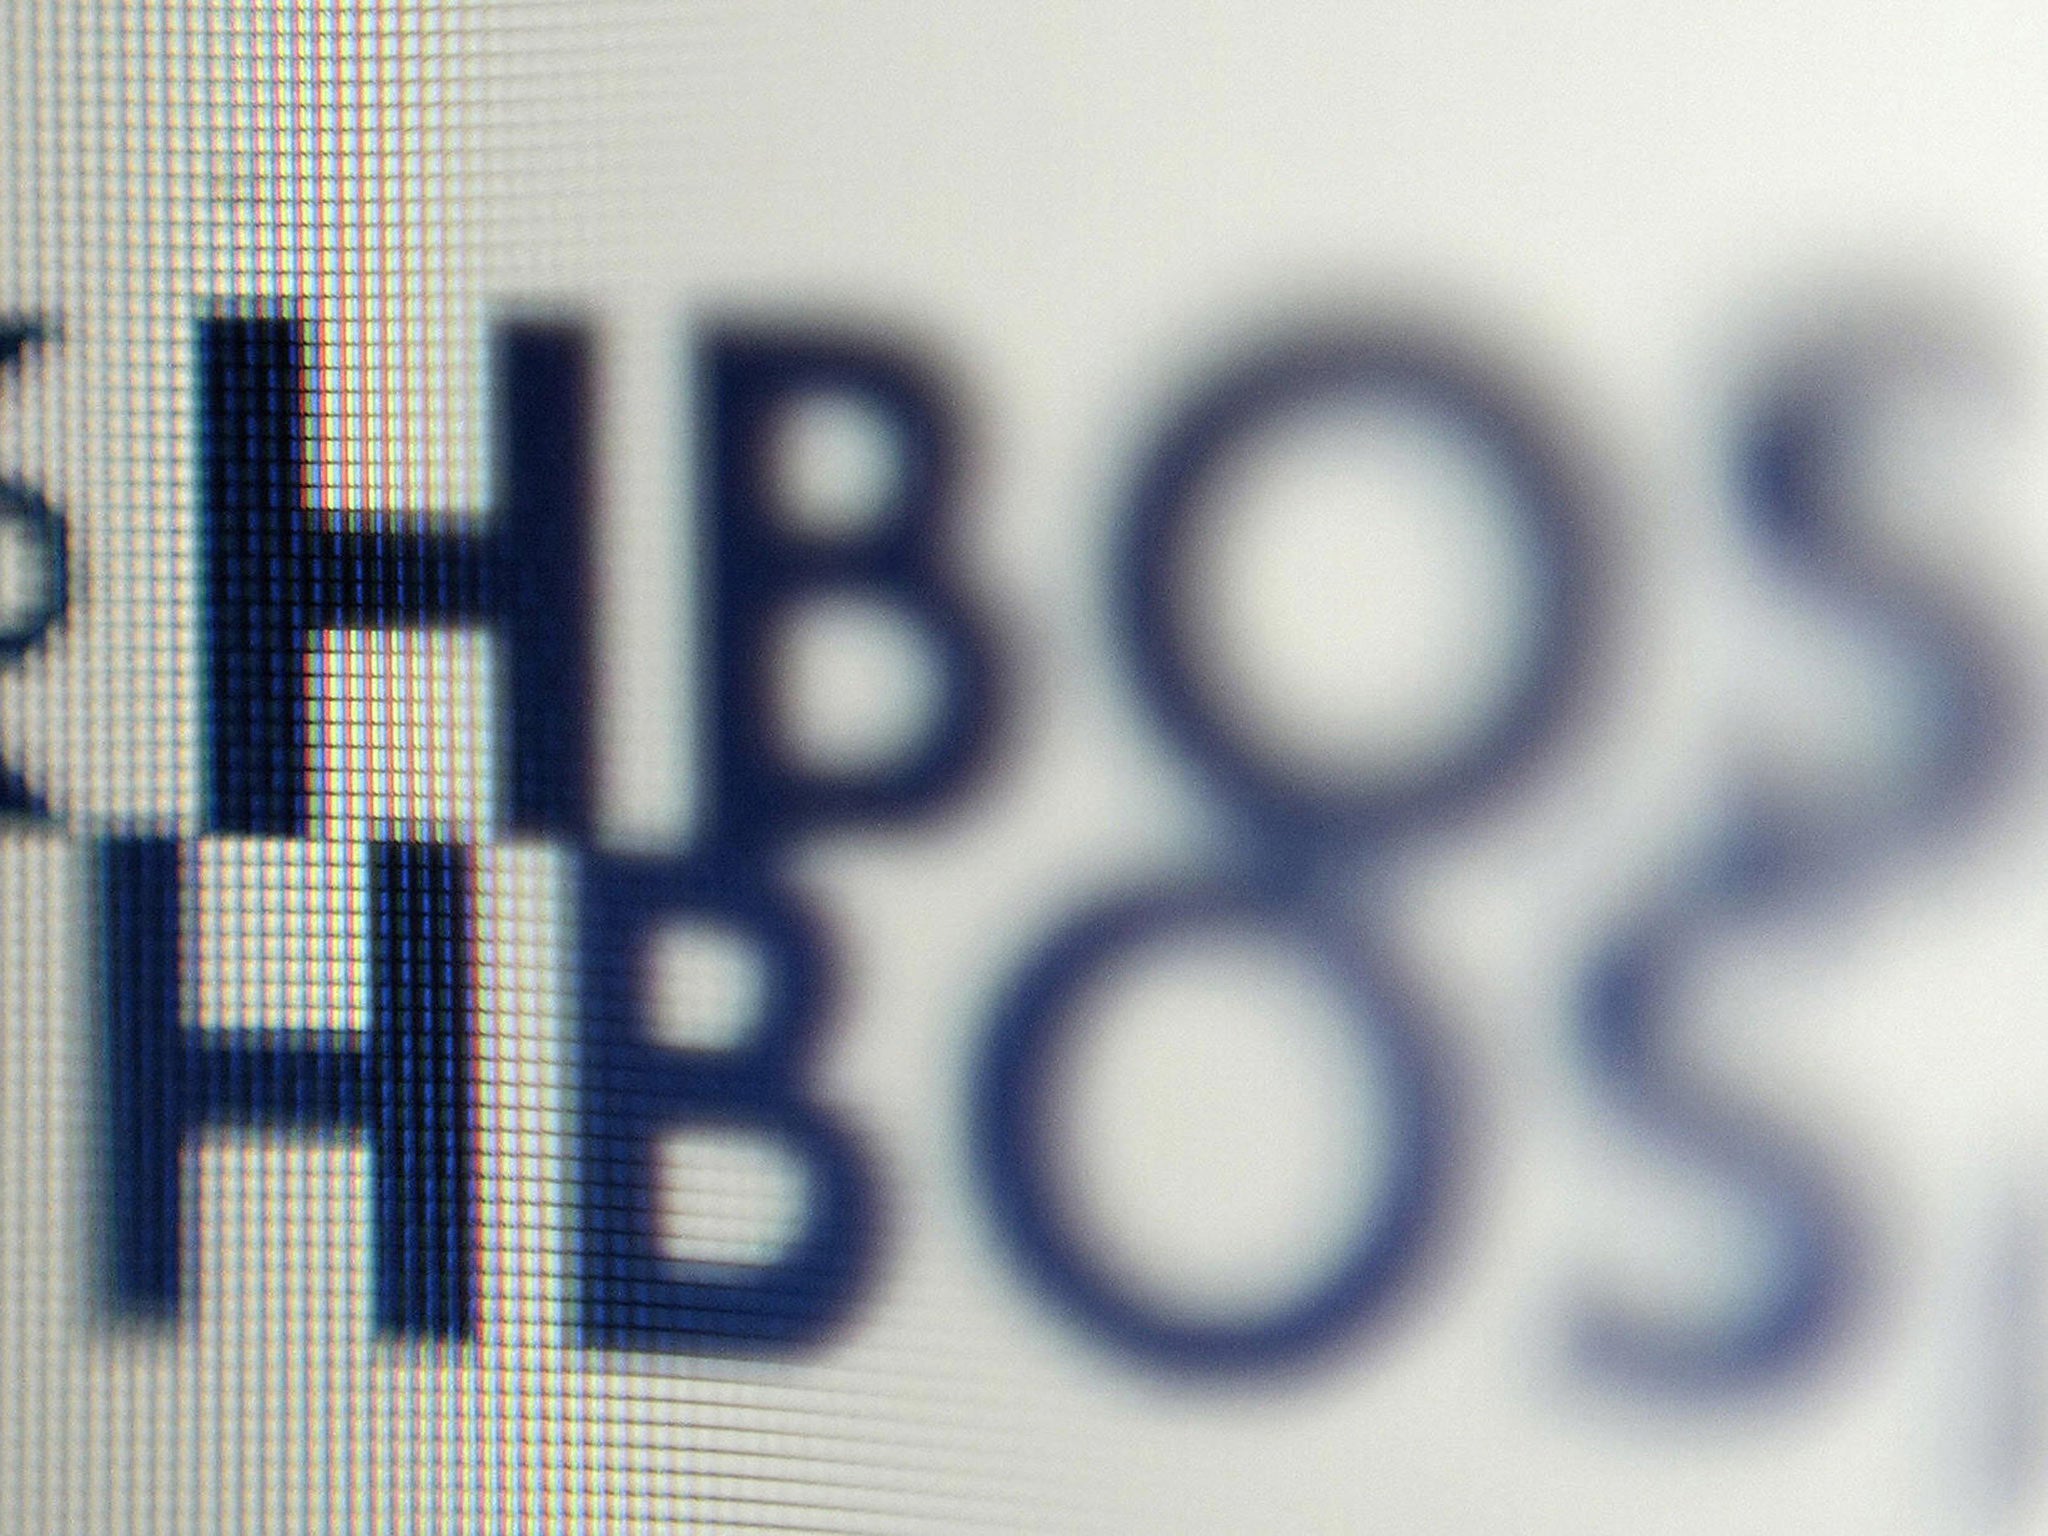 The FRC said it was now taking the lead in responding to and investigating audit matters - something it didn't do with HBOS